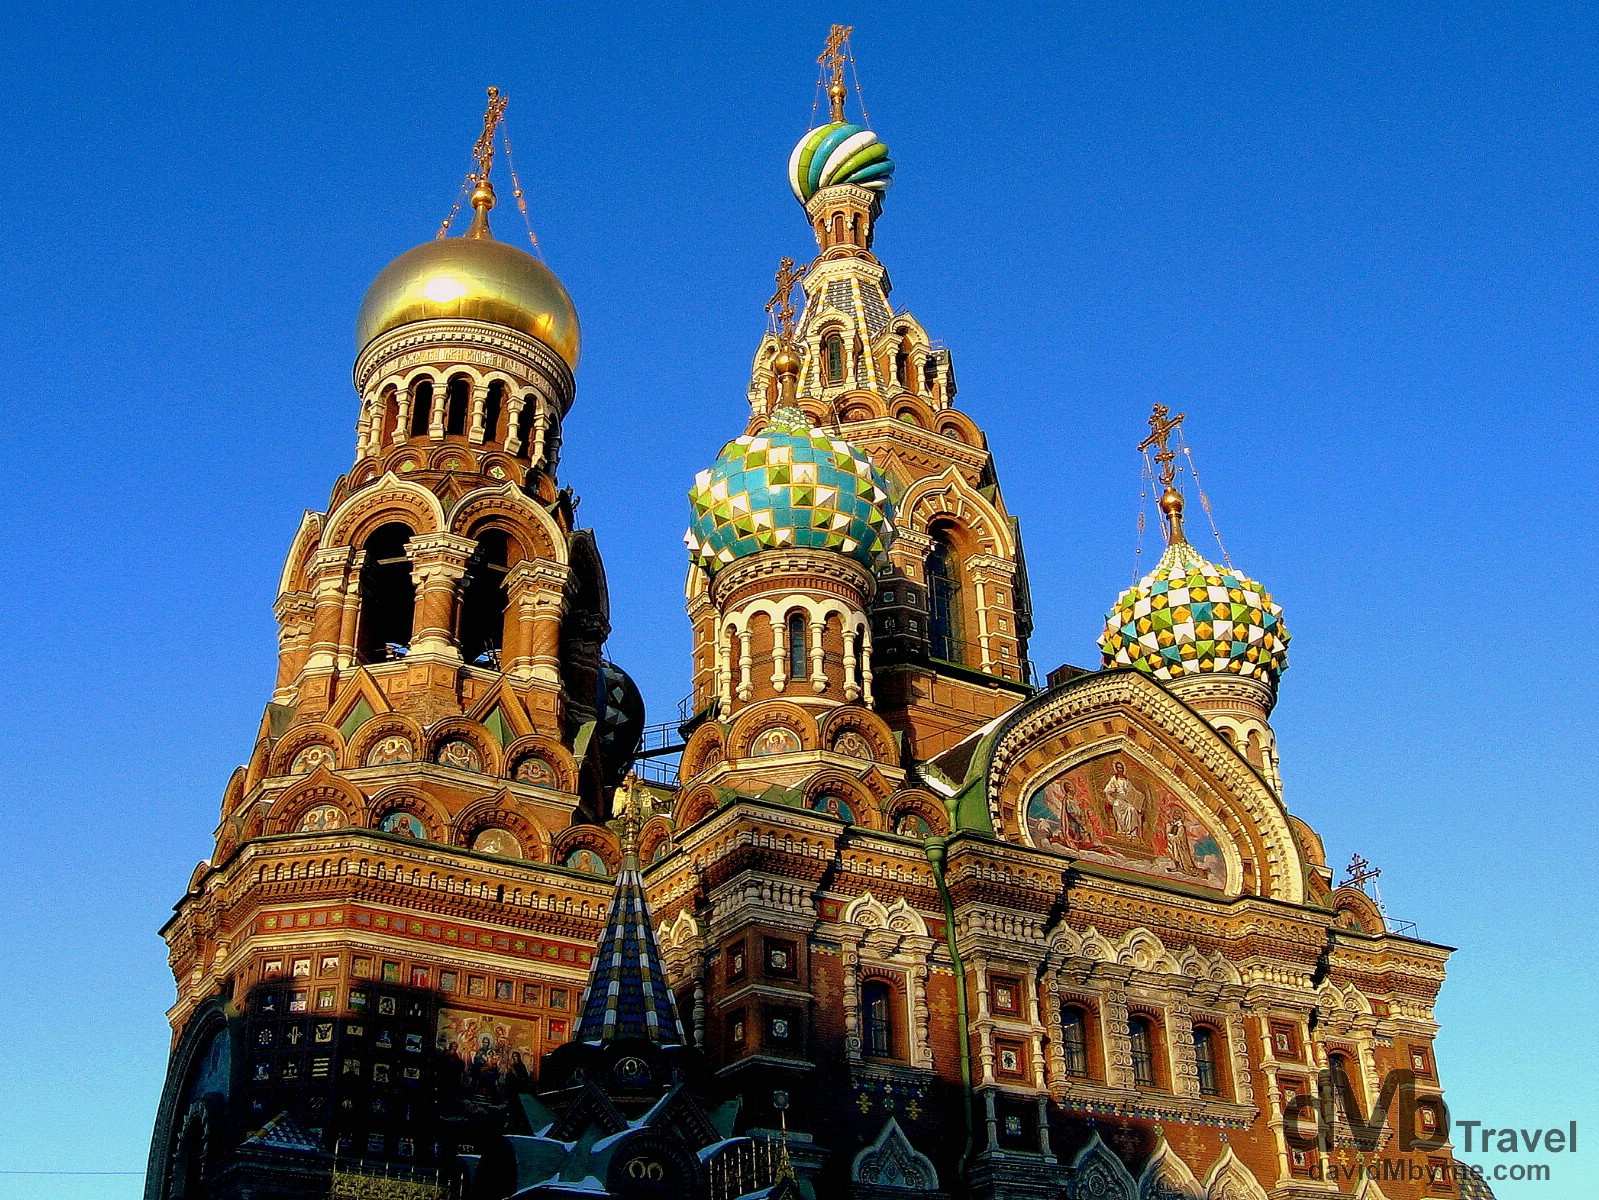 Church of the Savior on Spilled Blood, St. Petersburg, Russia. February 27, 2006.